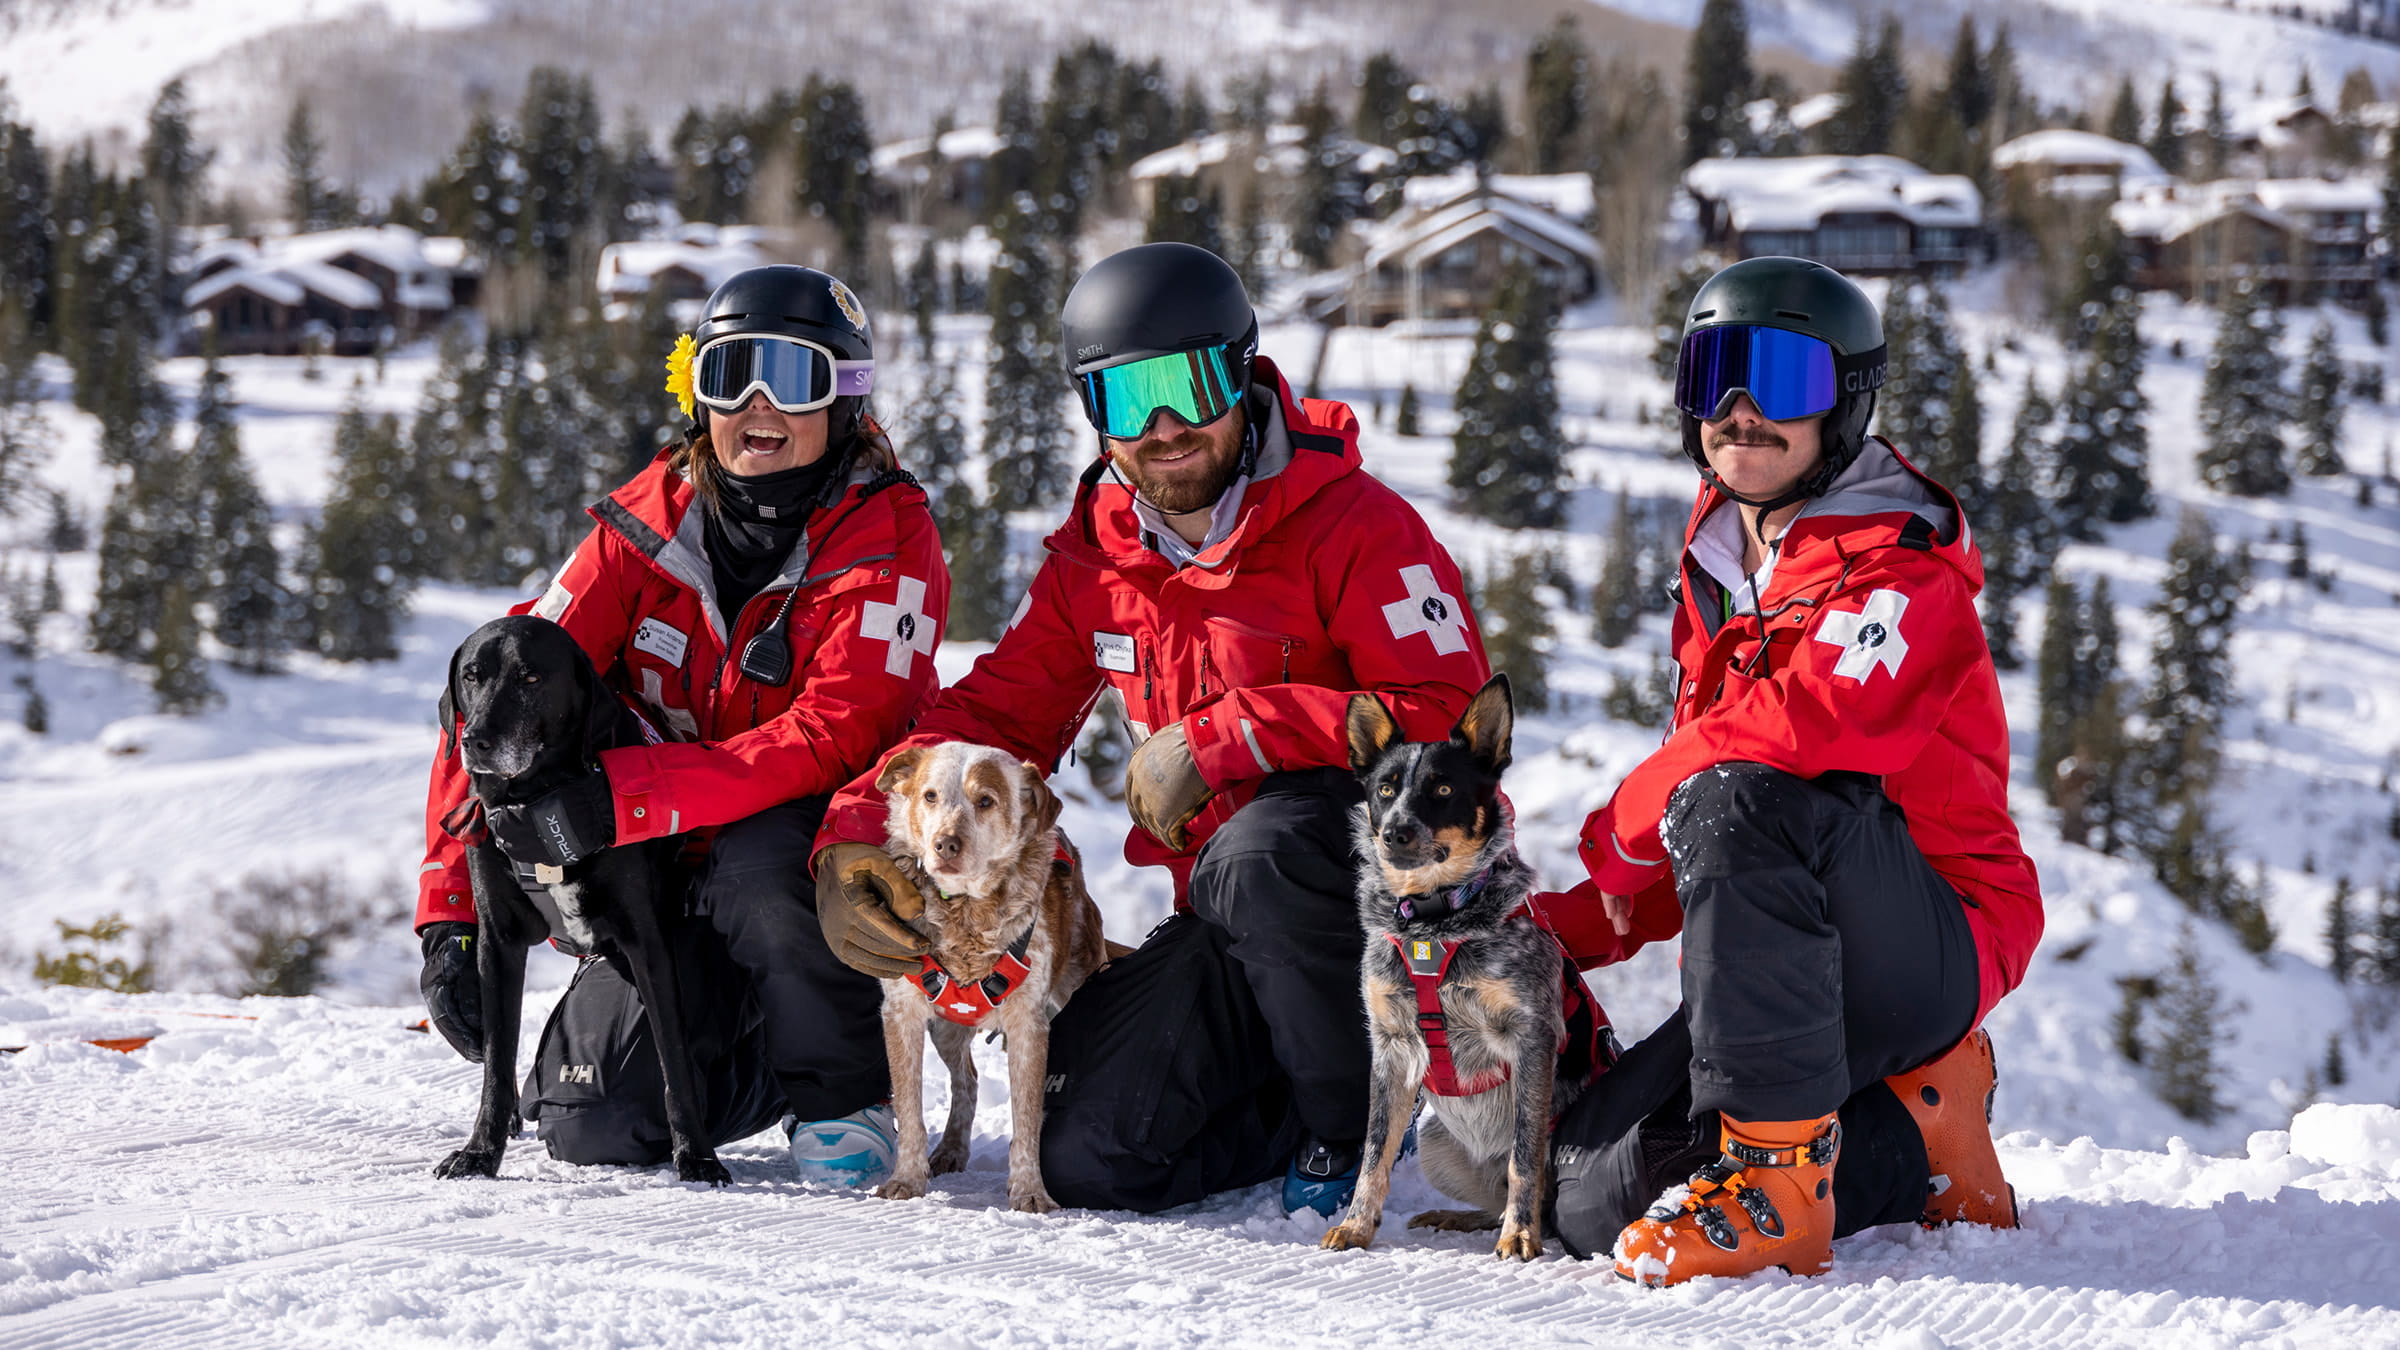 Deer Valley Ski Patrol Team smiling with the avalanche dogs